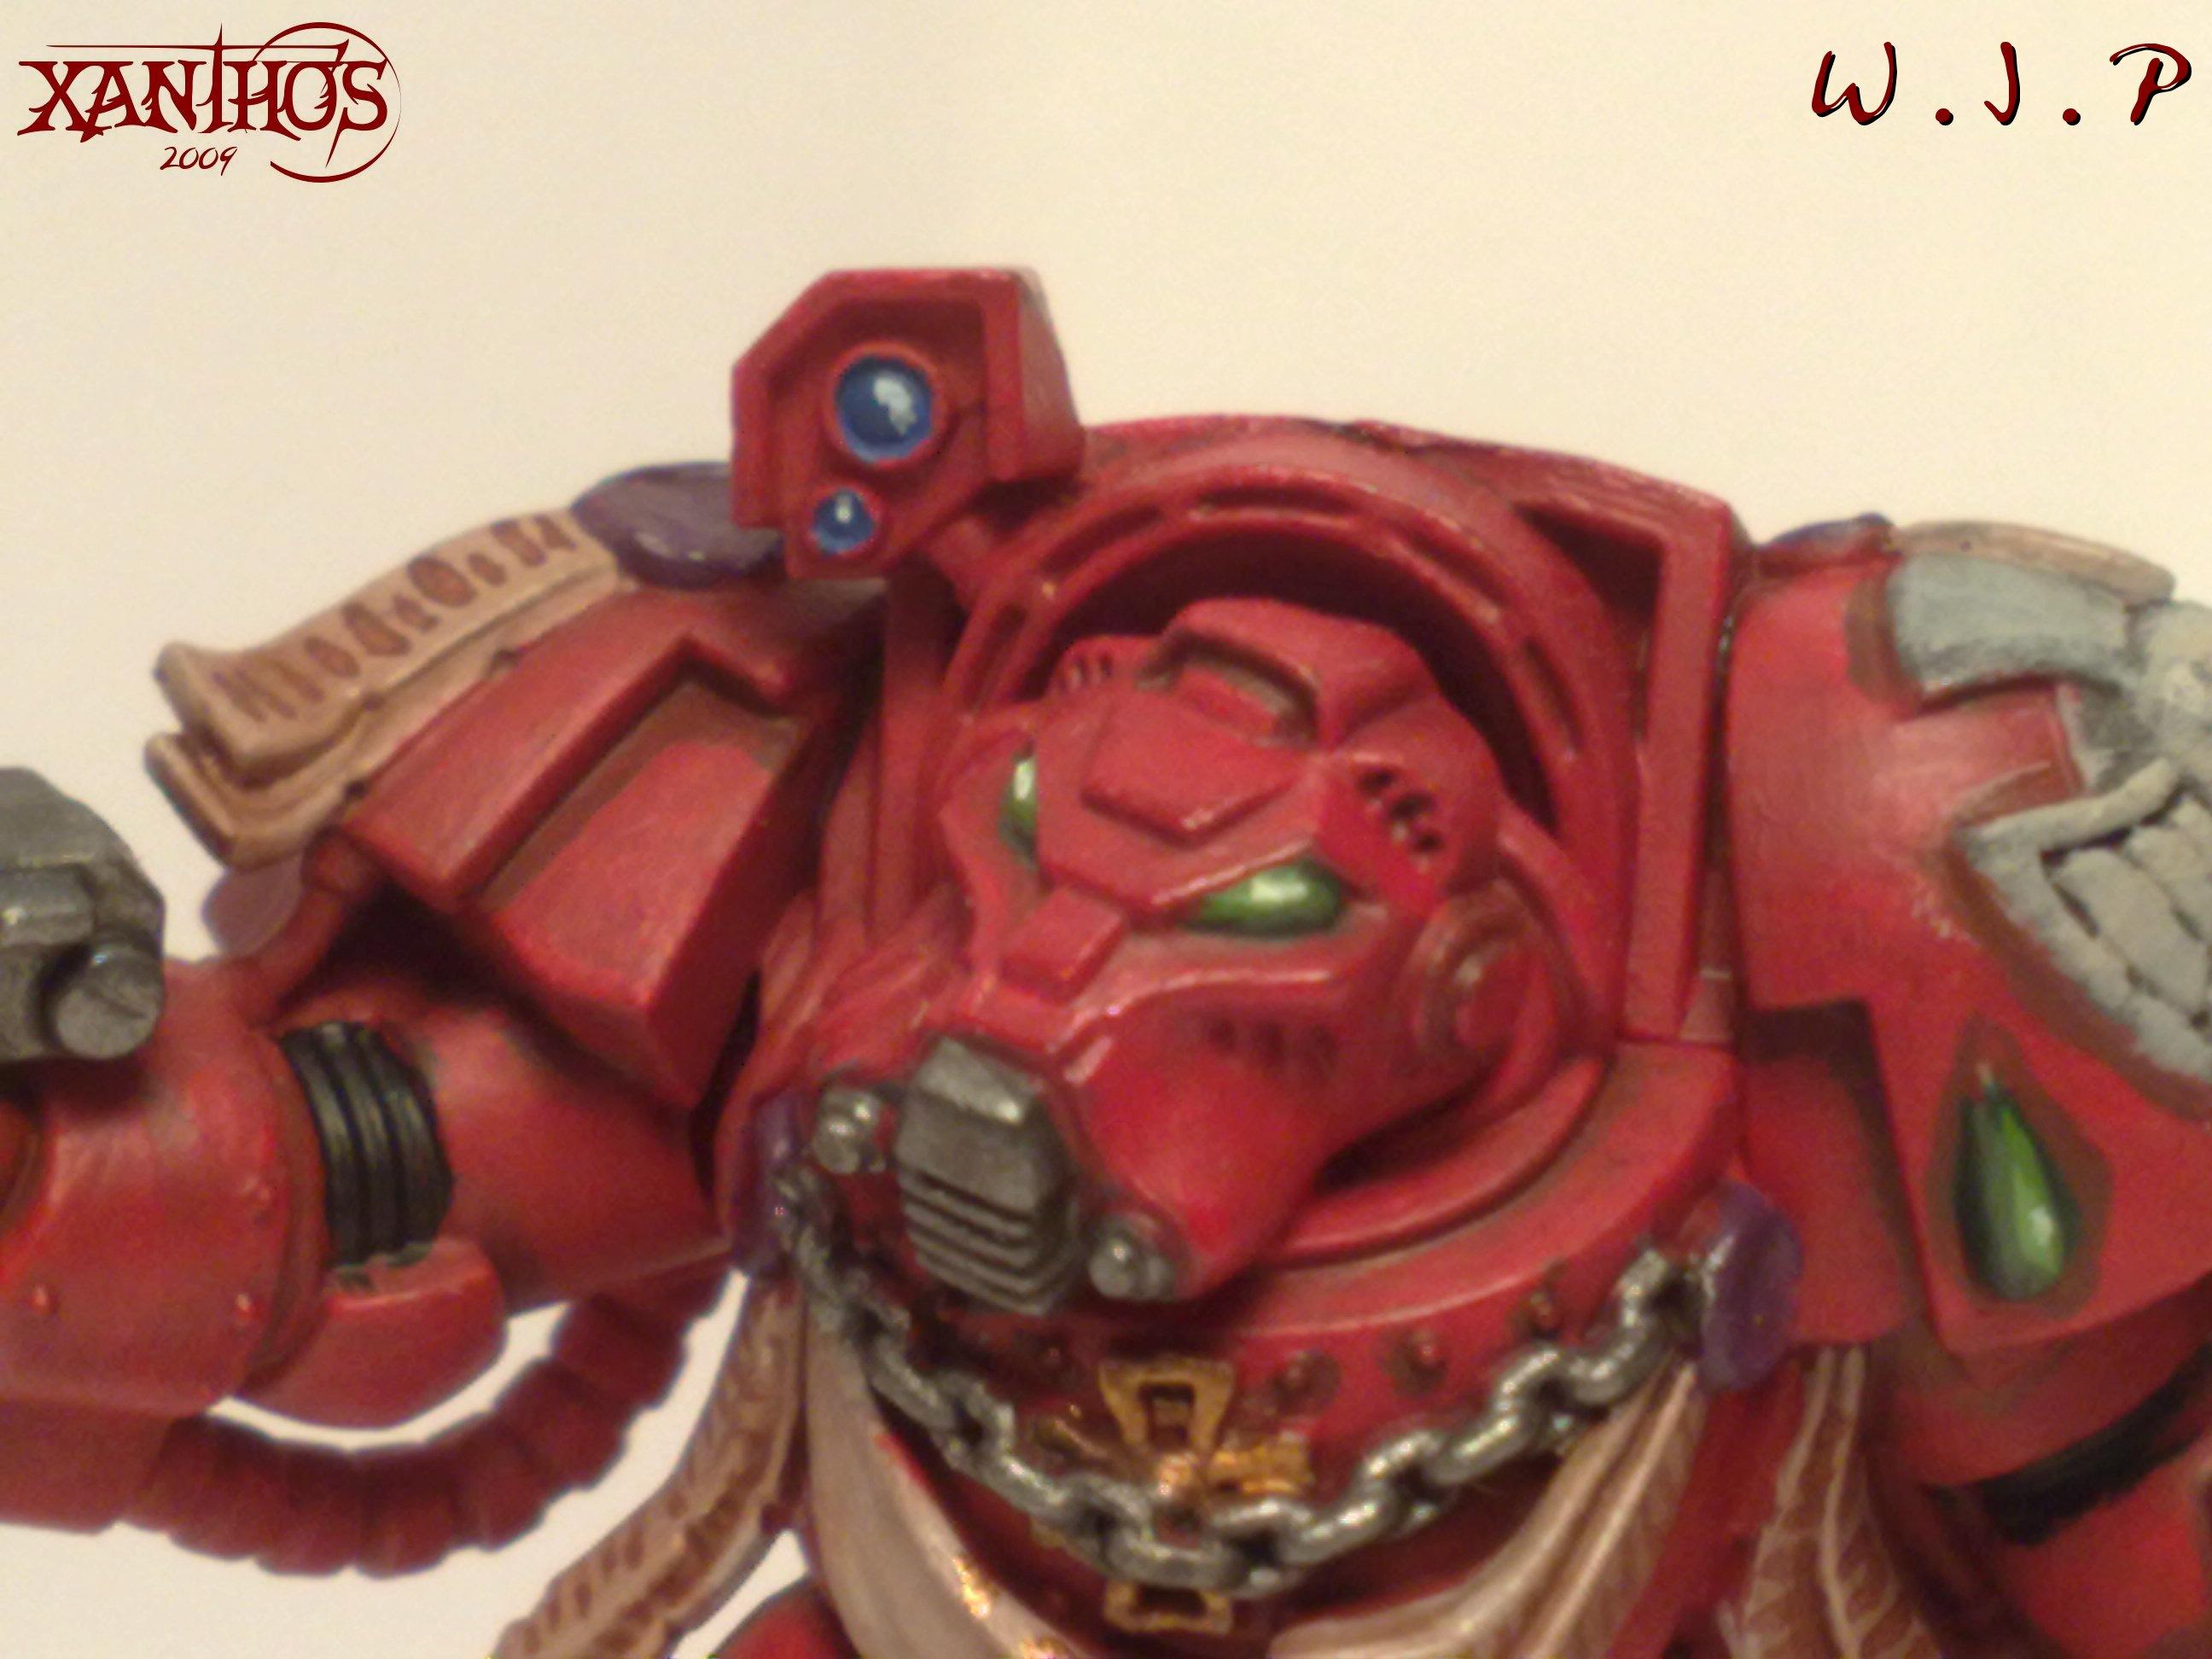 And a real closeup of the helmet. Glowy eyes, yay!